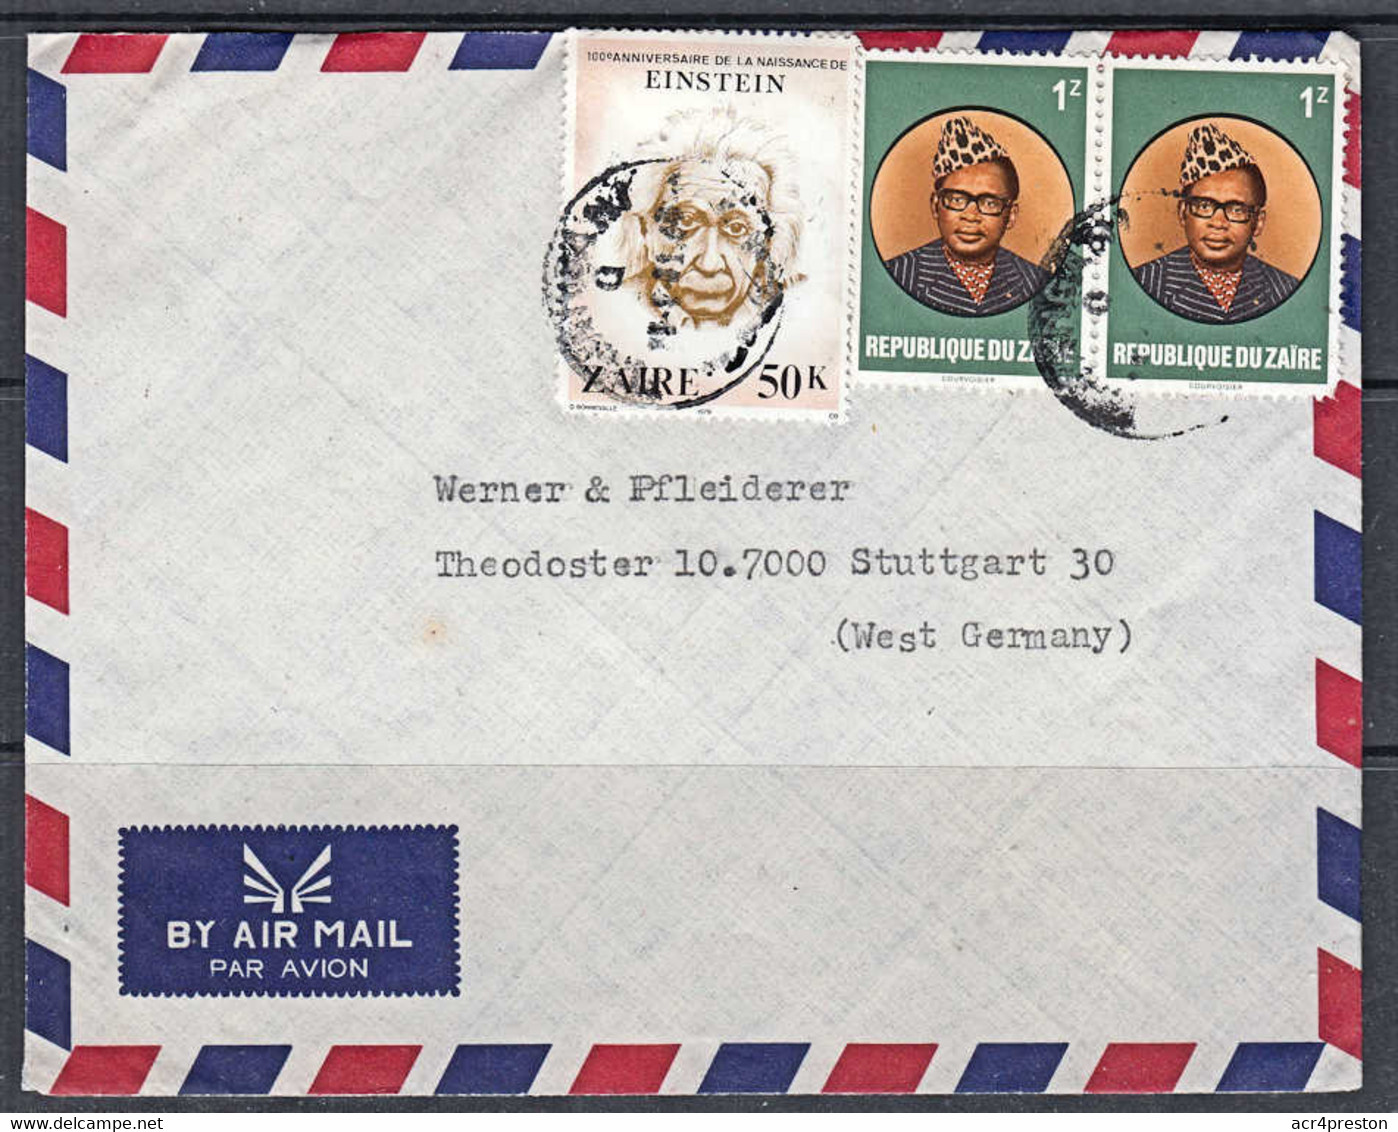 Ca0637  ZAIRE 1981,  Einstein And Mobutu Stamps On Kisangani Cover To Germany - Oblitérés